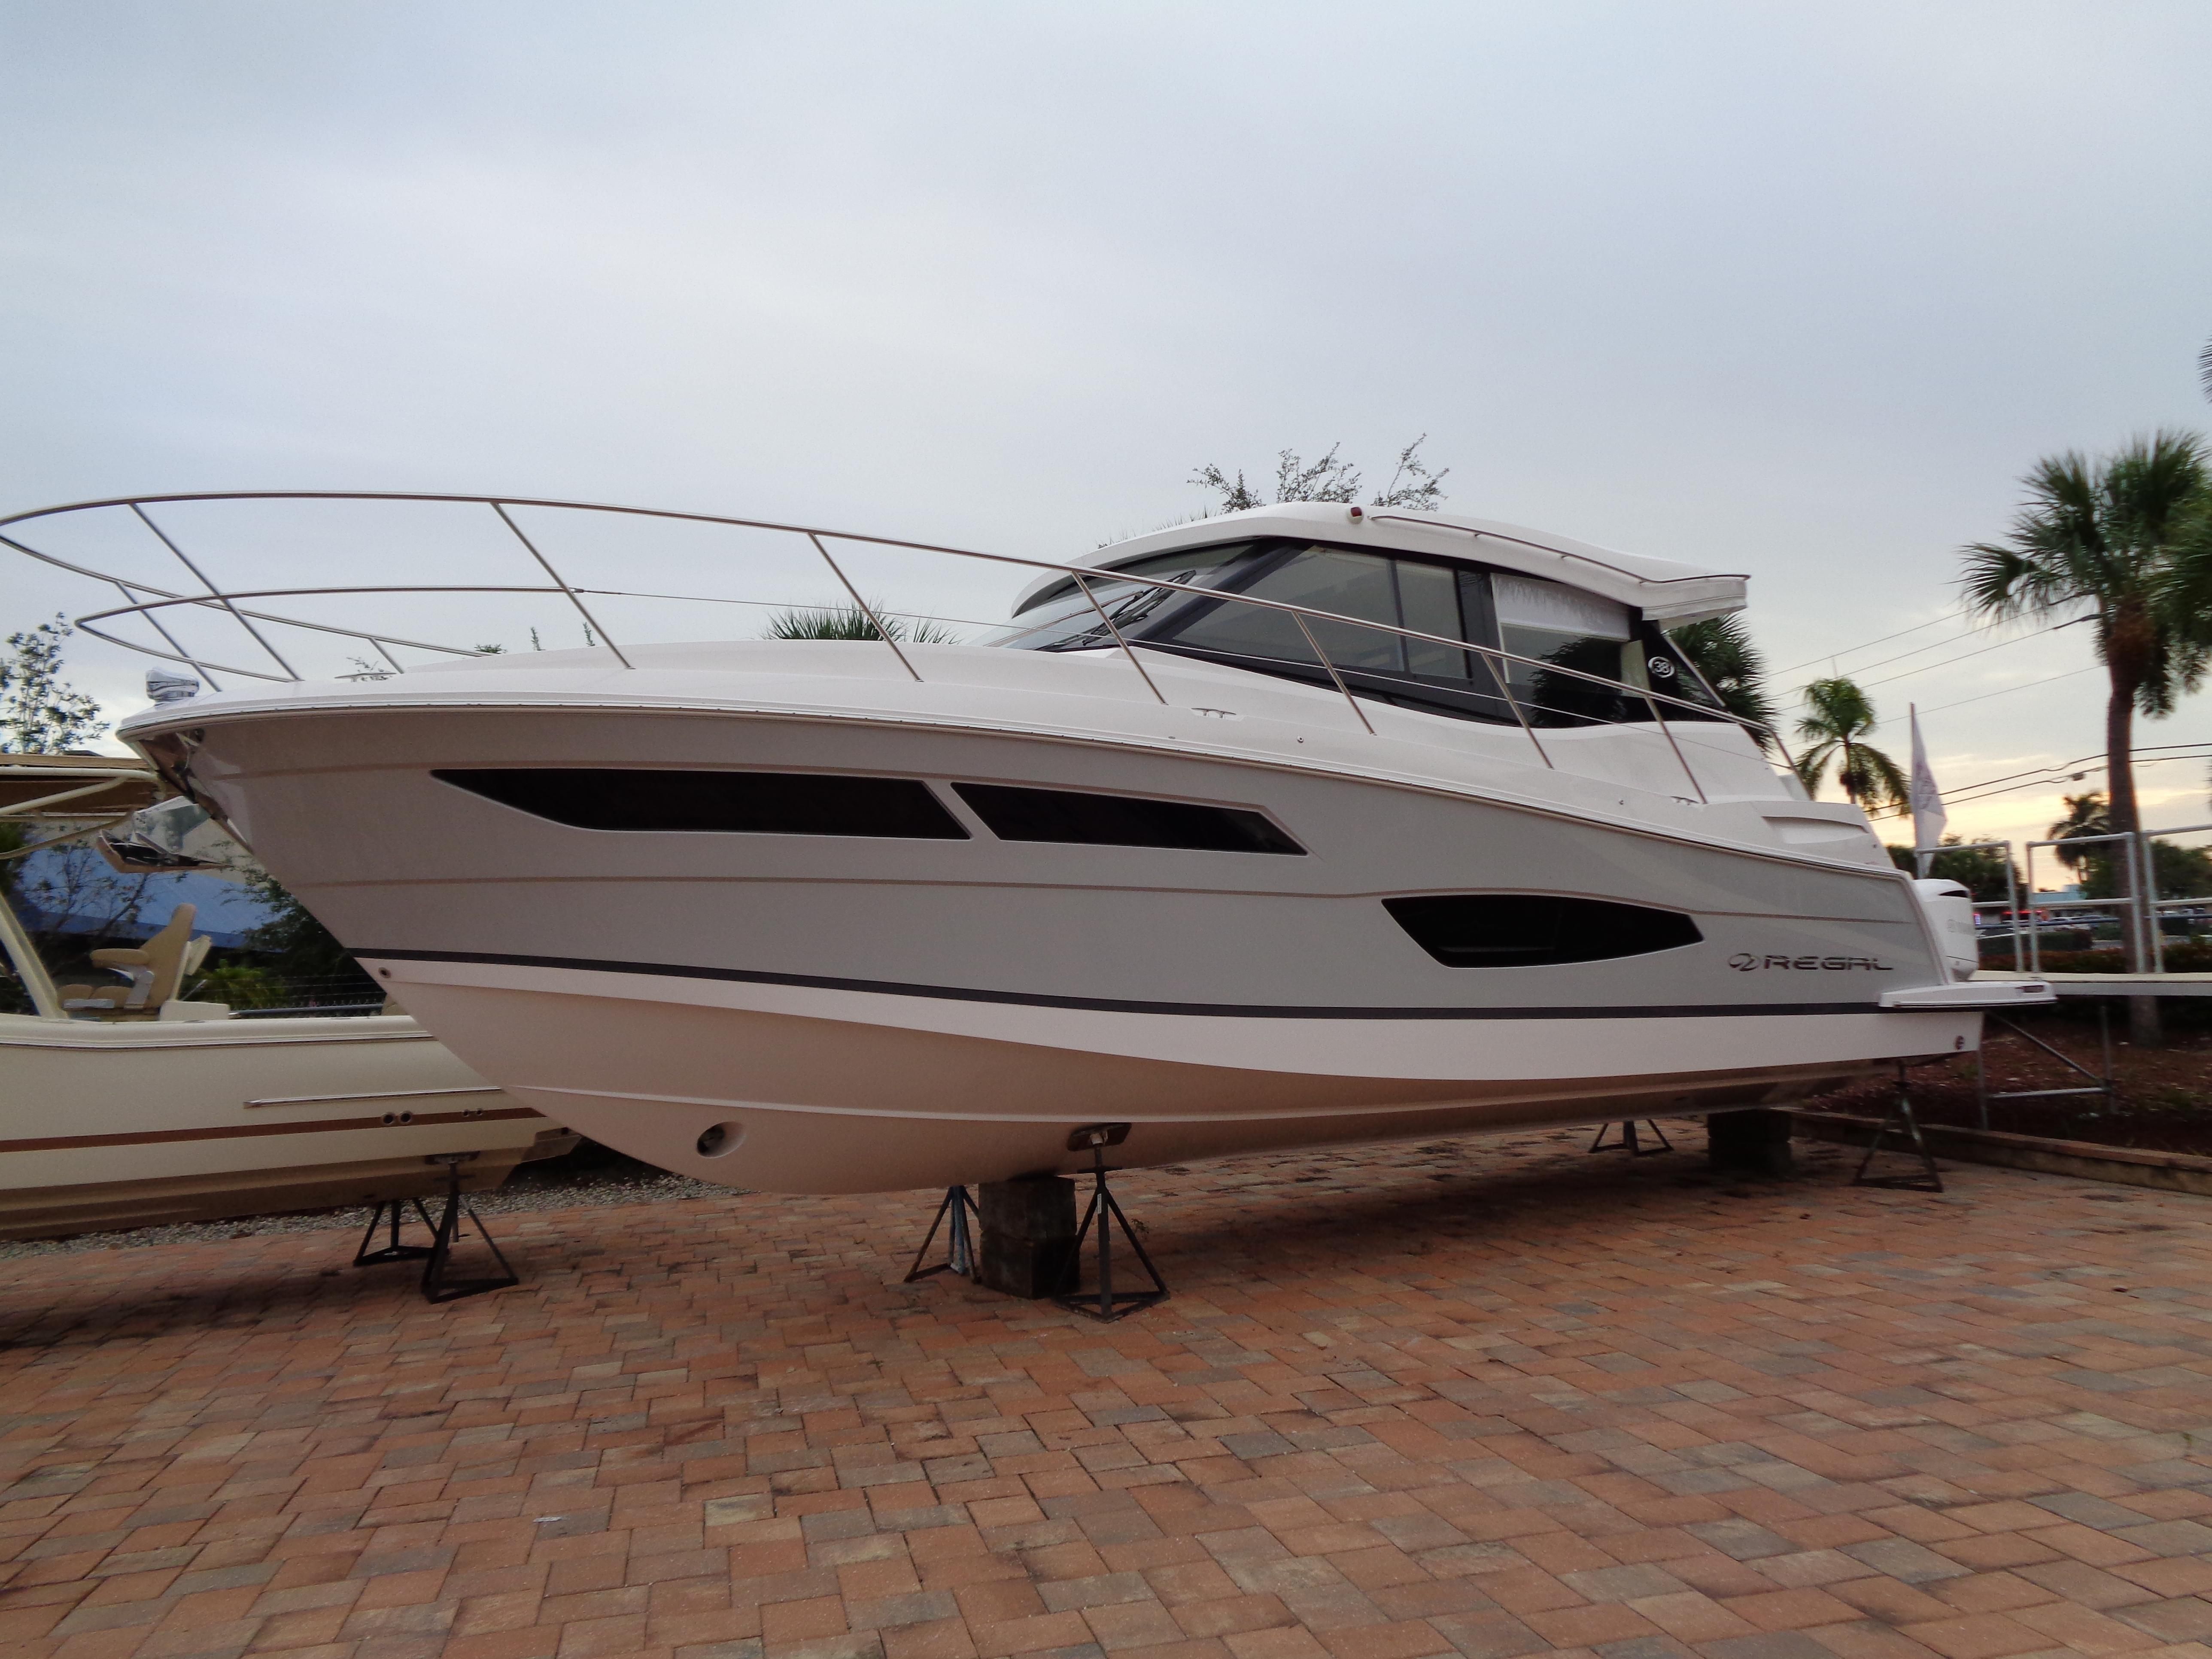 x 38 yacht for sale